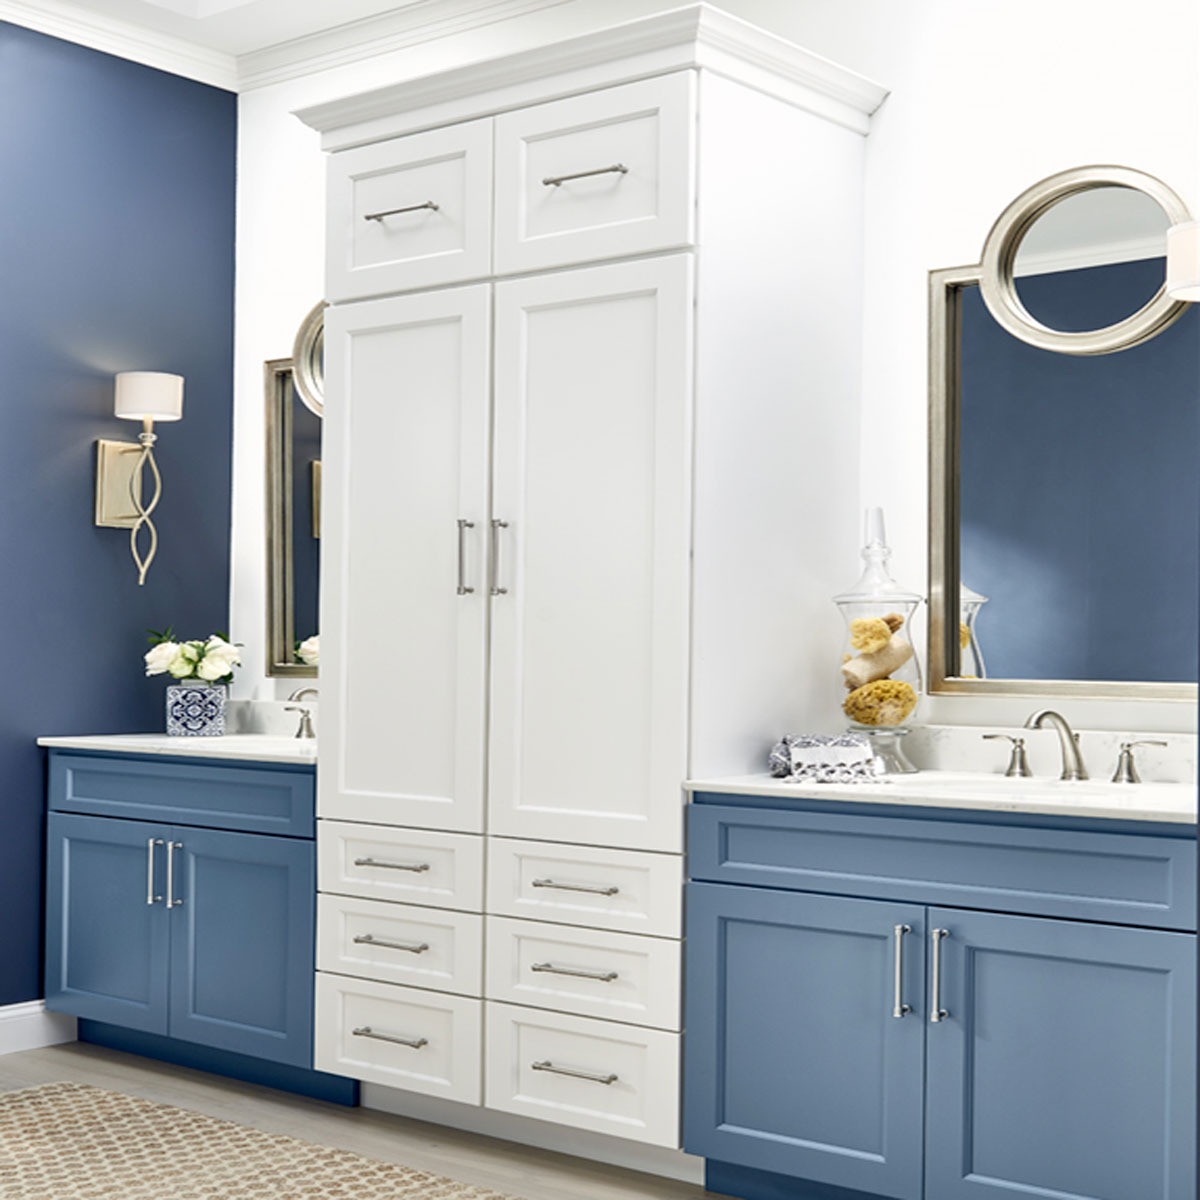 How To Mix And Match Different Cabinet Styles In Your Home